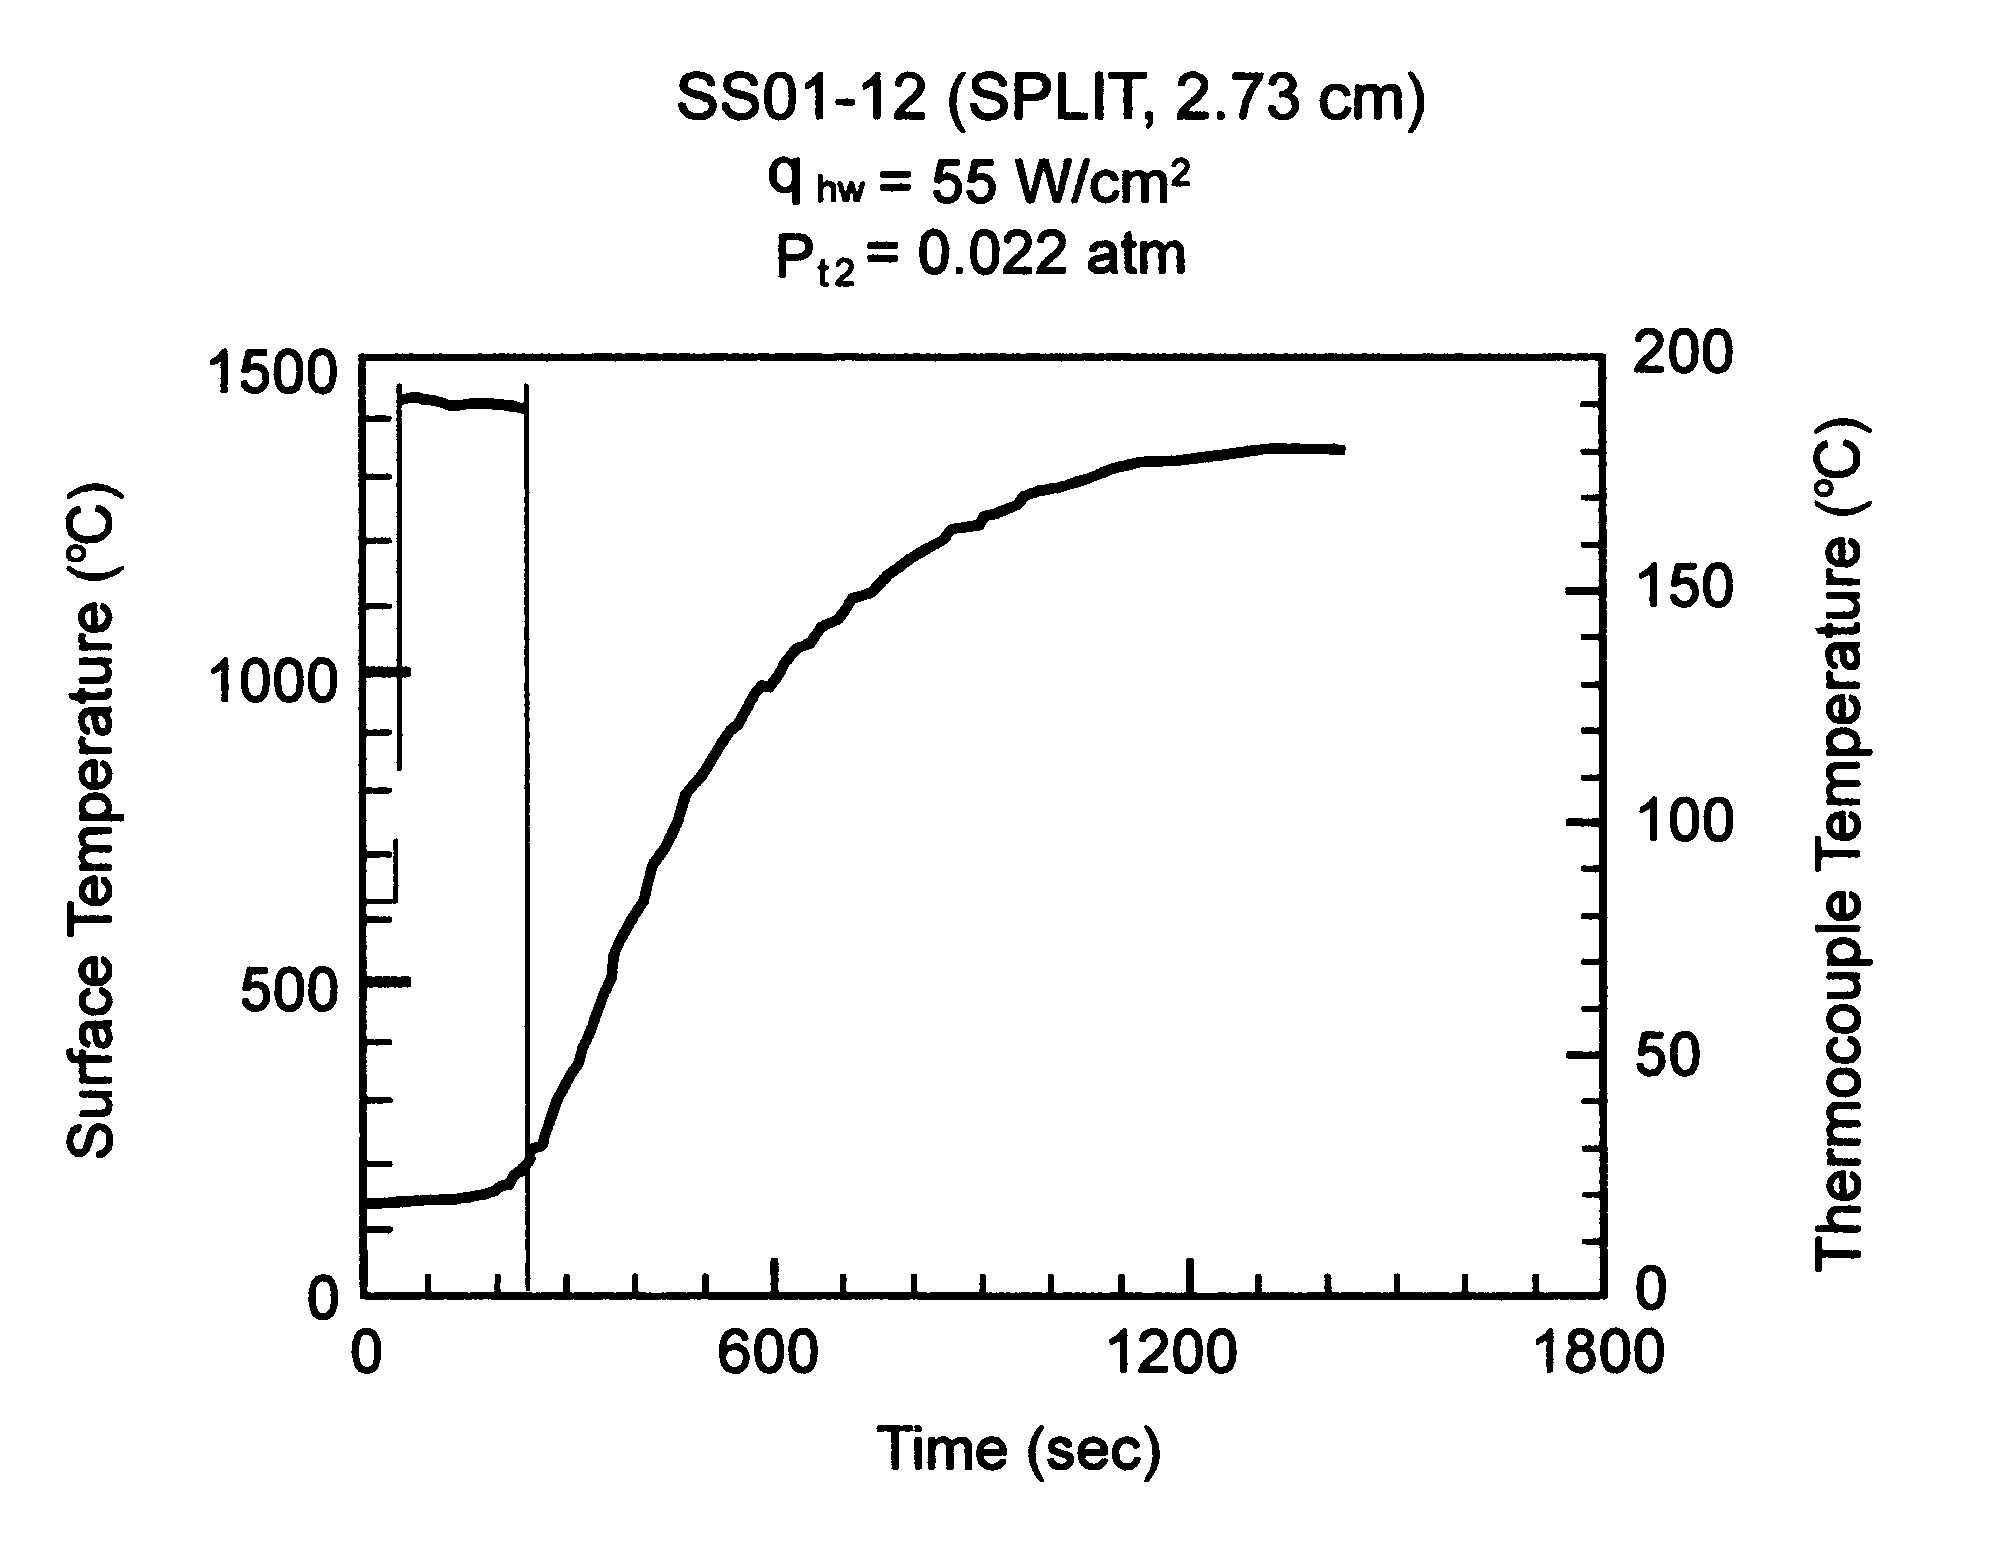 Secondary polymer layered impregnated tile